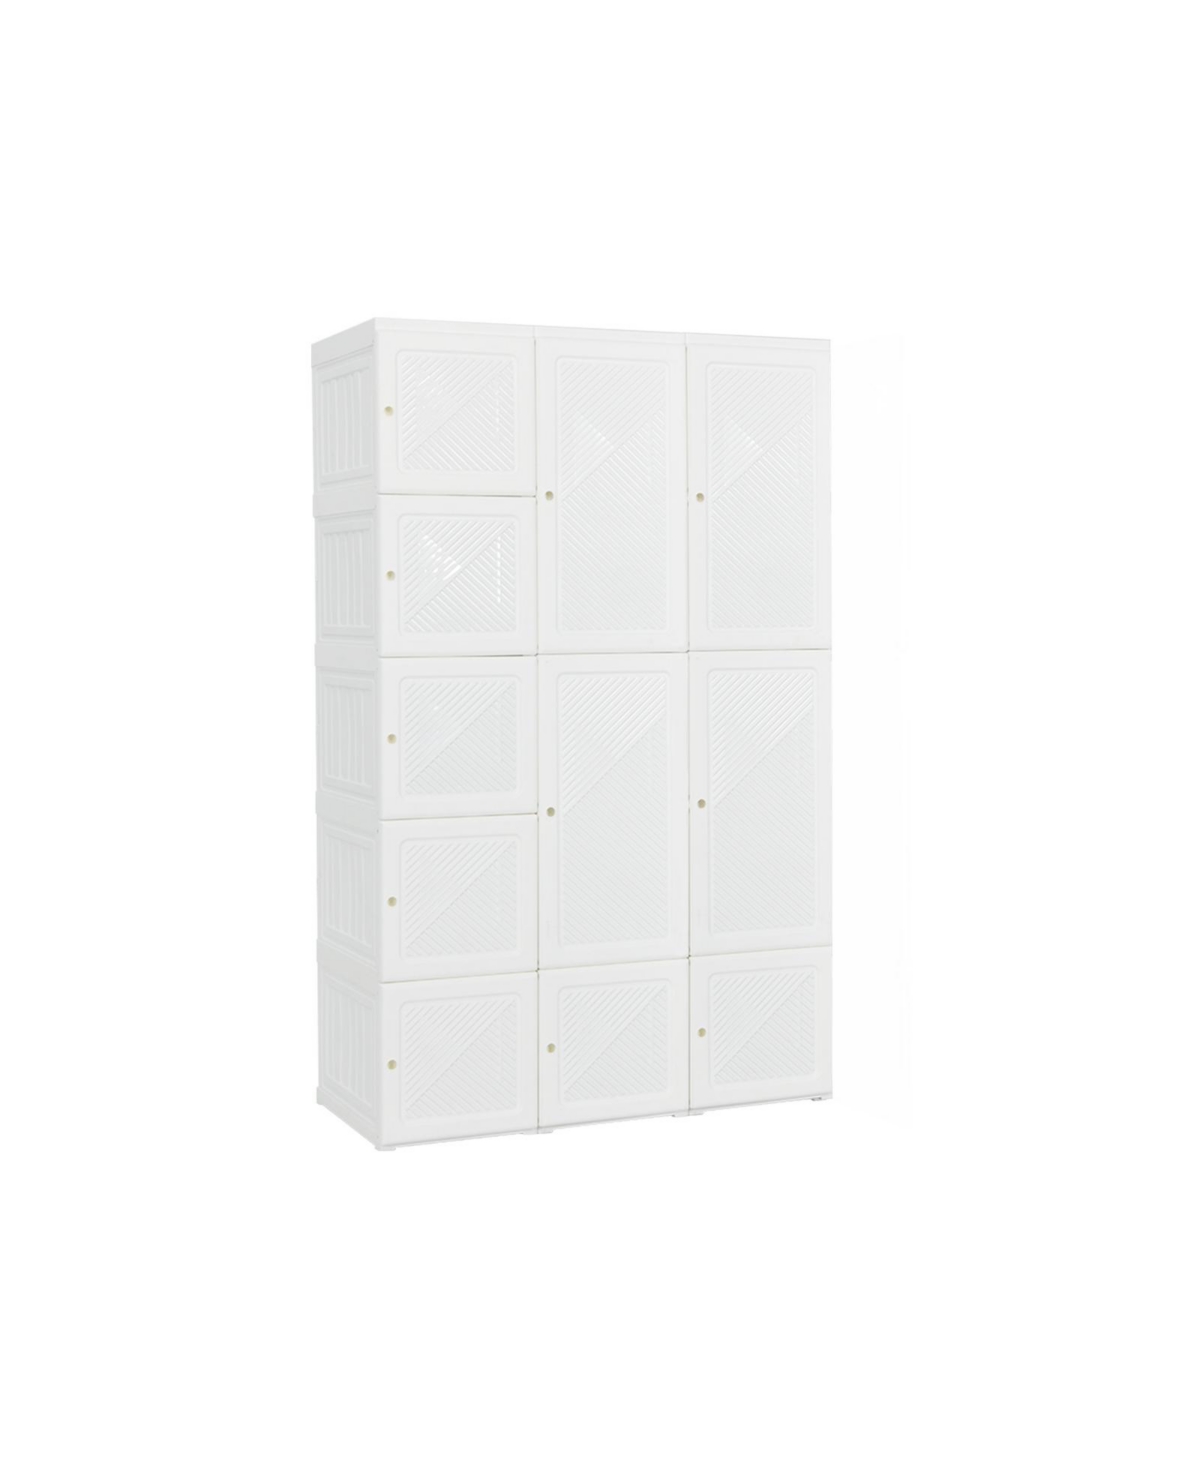 Foldable Armoire Wardrobe Closet with 10 Cubes - White